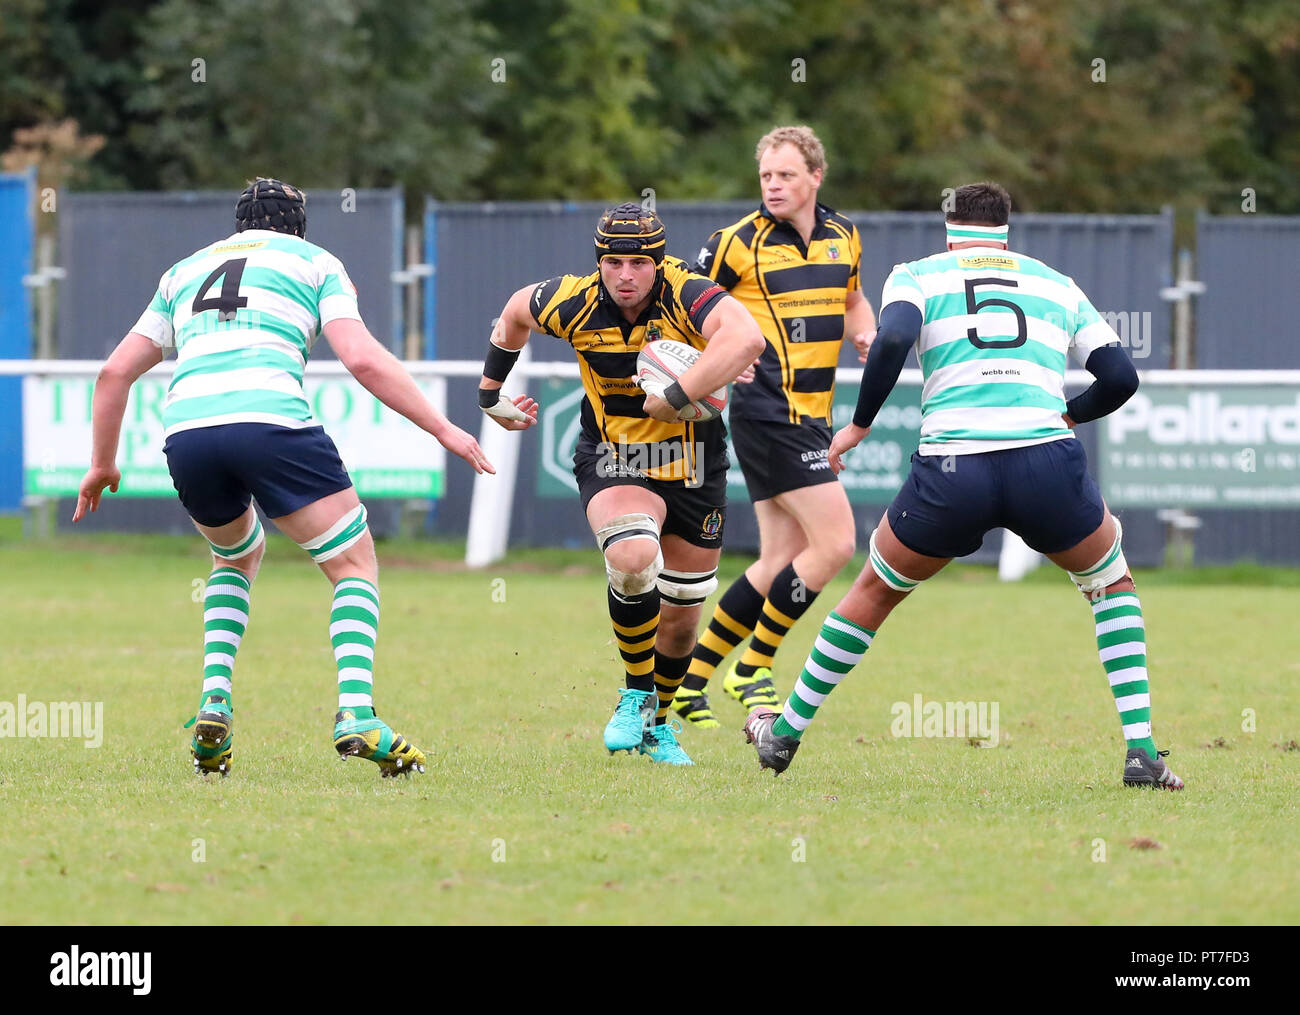 Leicester, England. Rugby Union, Hinckley rfc v South Leicester rfc.   James Moreton makes a break for Hinckley  during the RFU National League 2 North (NL2N) game played at the Leicester  Road Stadium.  © Phil Hutchinson / Alamy Live News Stock Photo